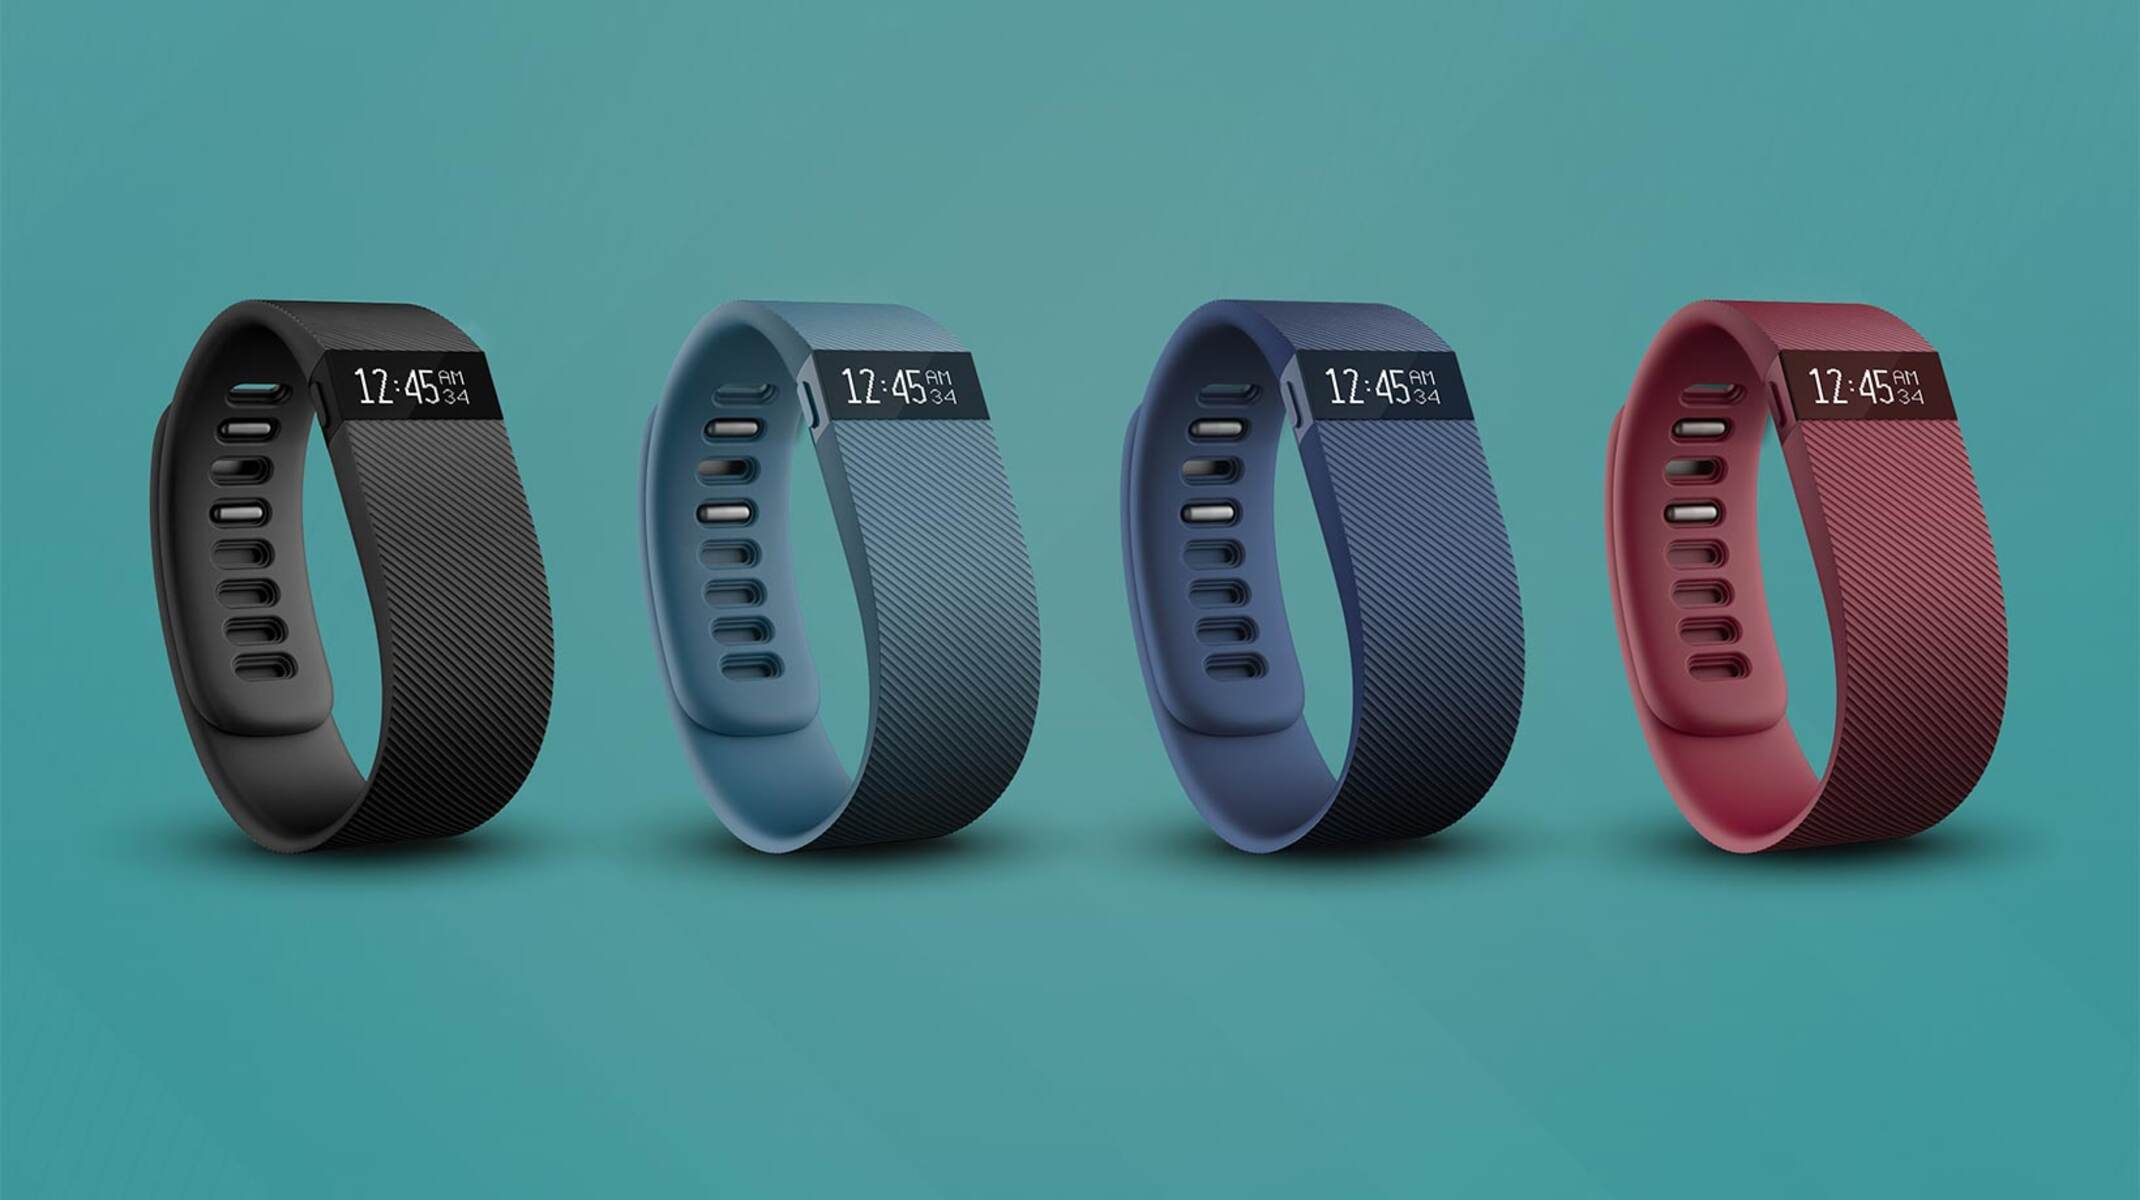 charge-hr-time-change-a-guide-to-changing-the-time-on-fitbit-charge-hr